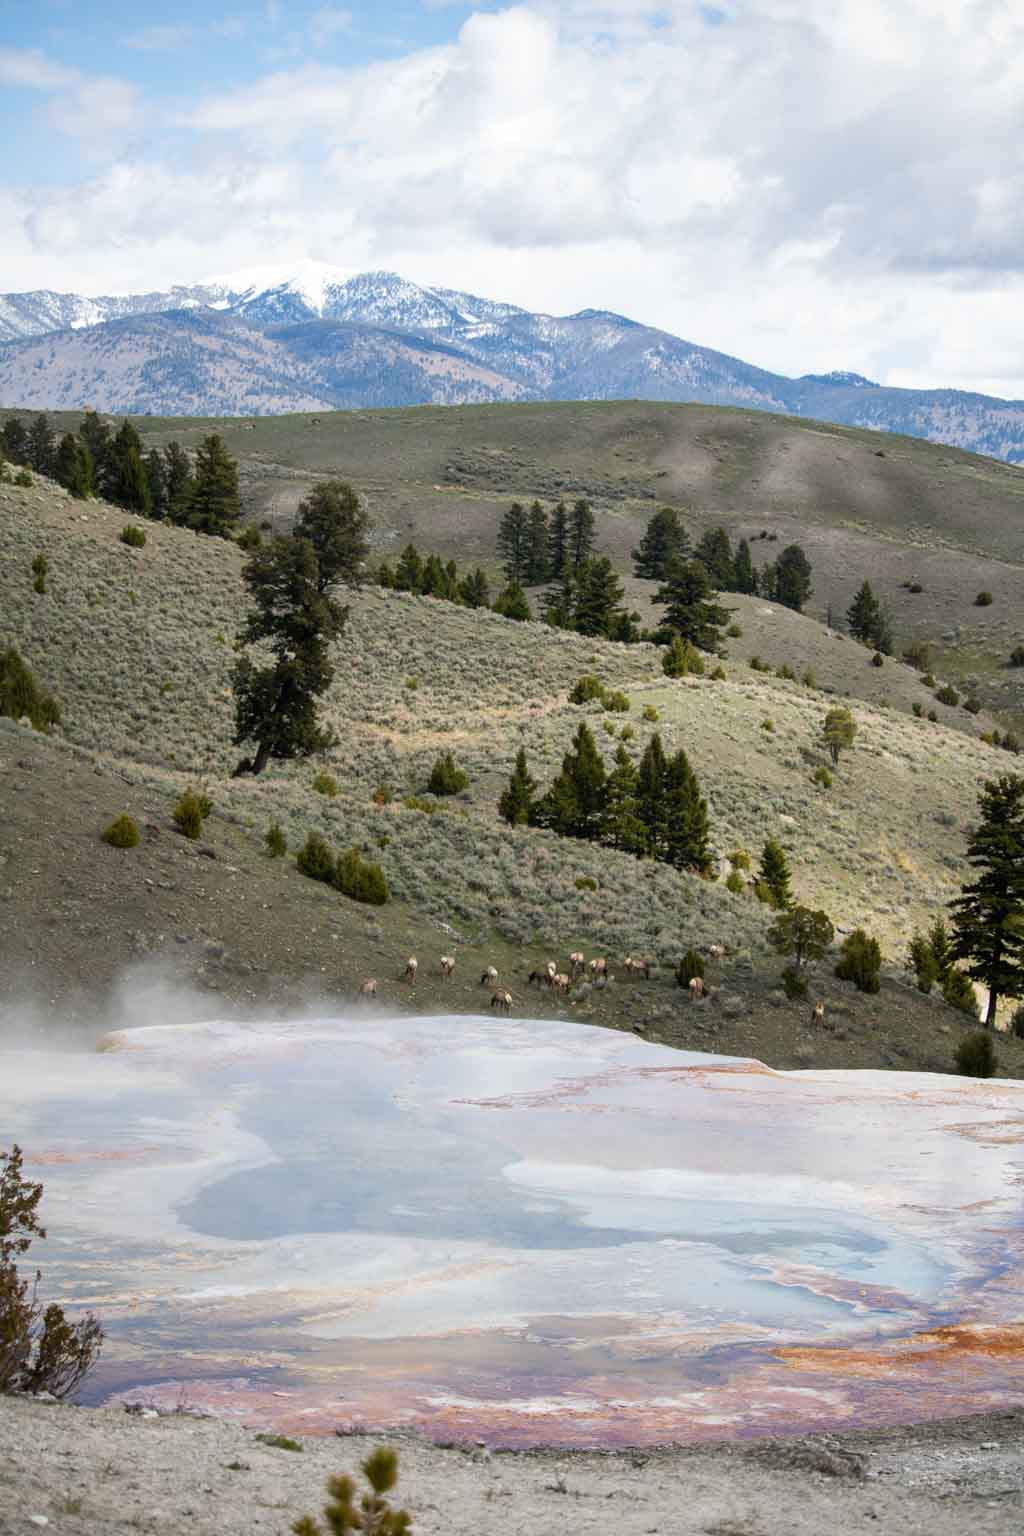 Yellowstone National Park was one of the most visited national parks in 2021